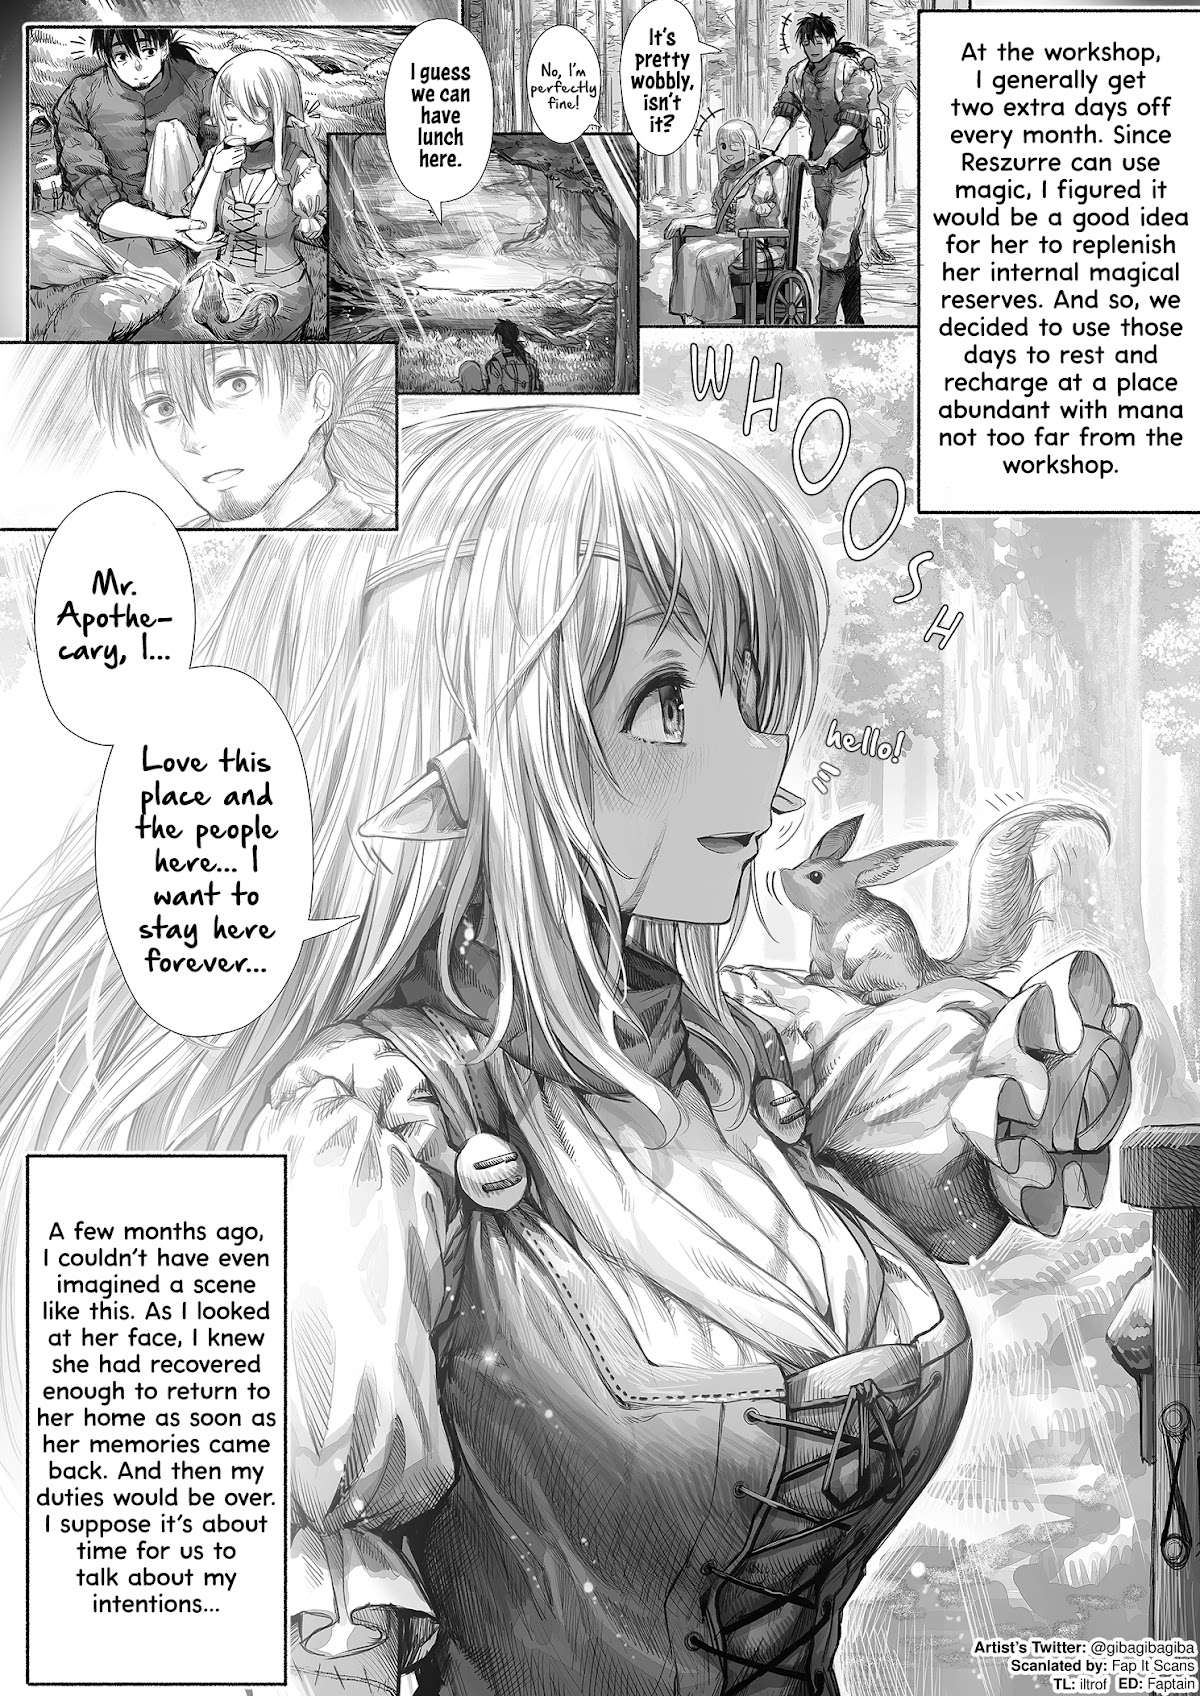 The Apothecary Is Gonna Make This Ragged Elf Happy - Page 1